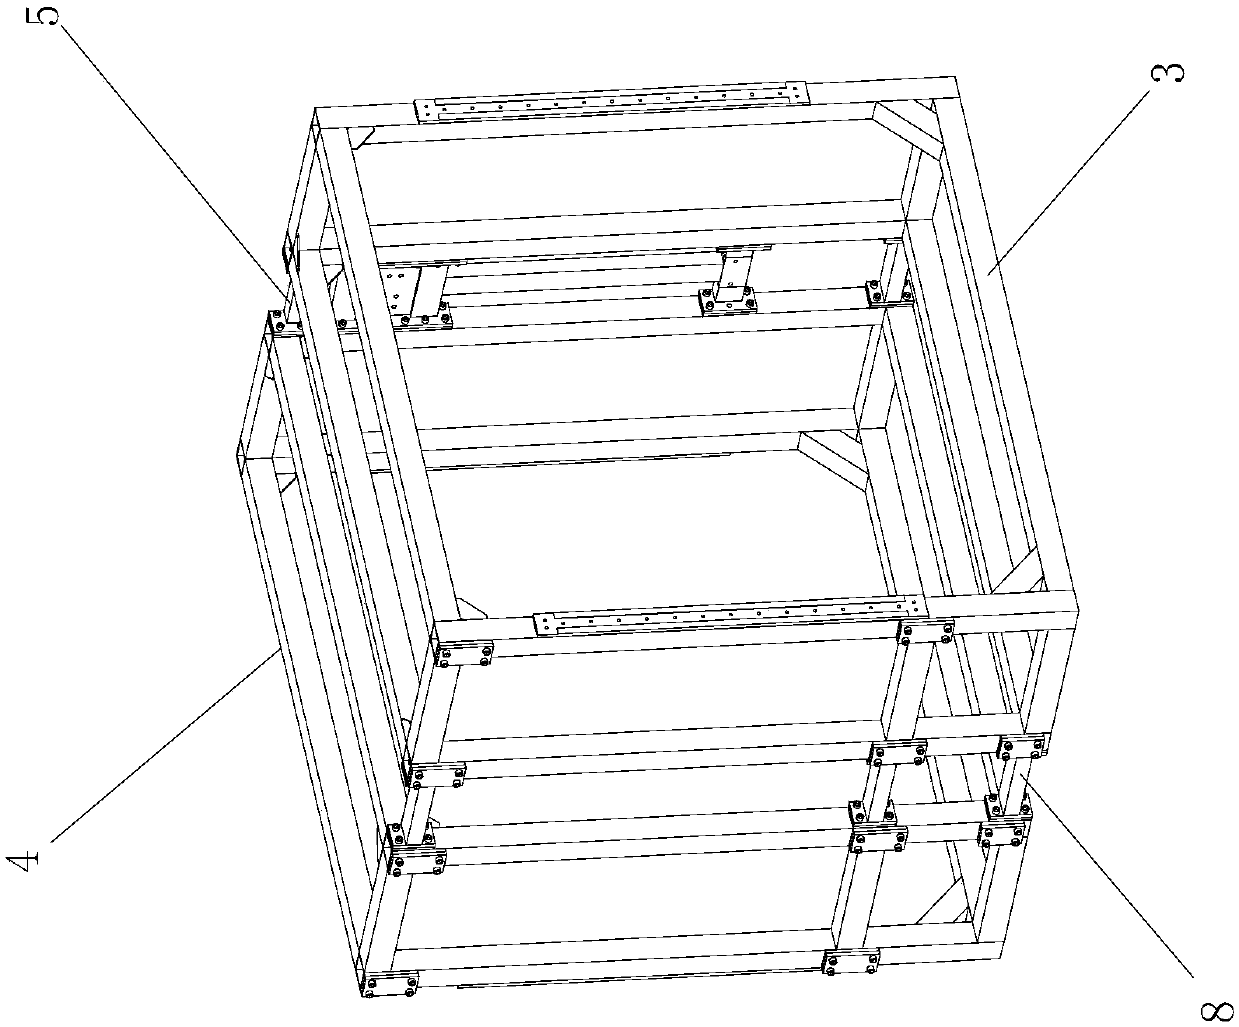 Main frame for modular combined anti-seismic support and hanger anti-seismic performance detection equipment